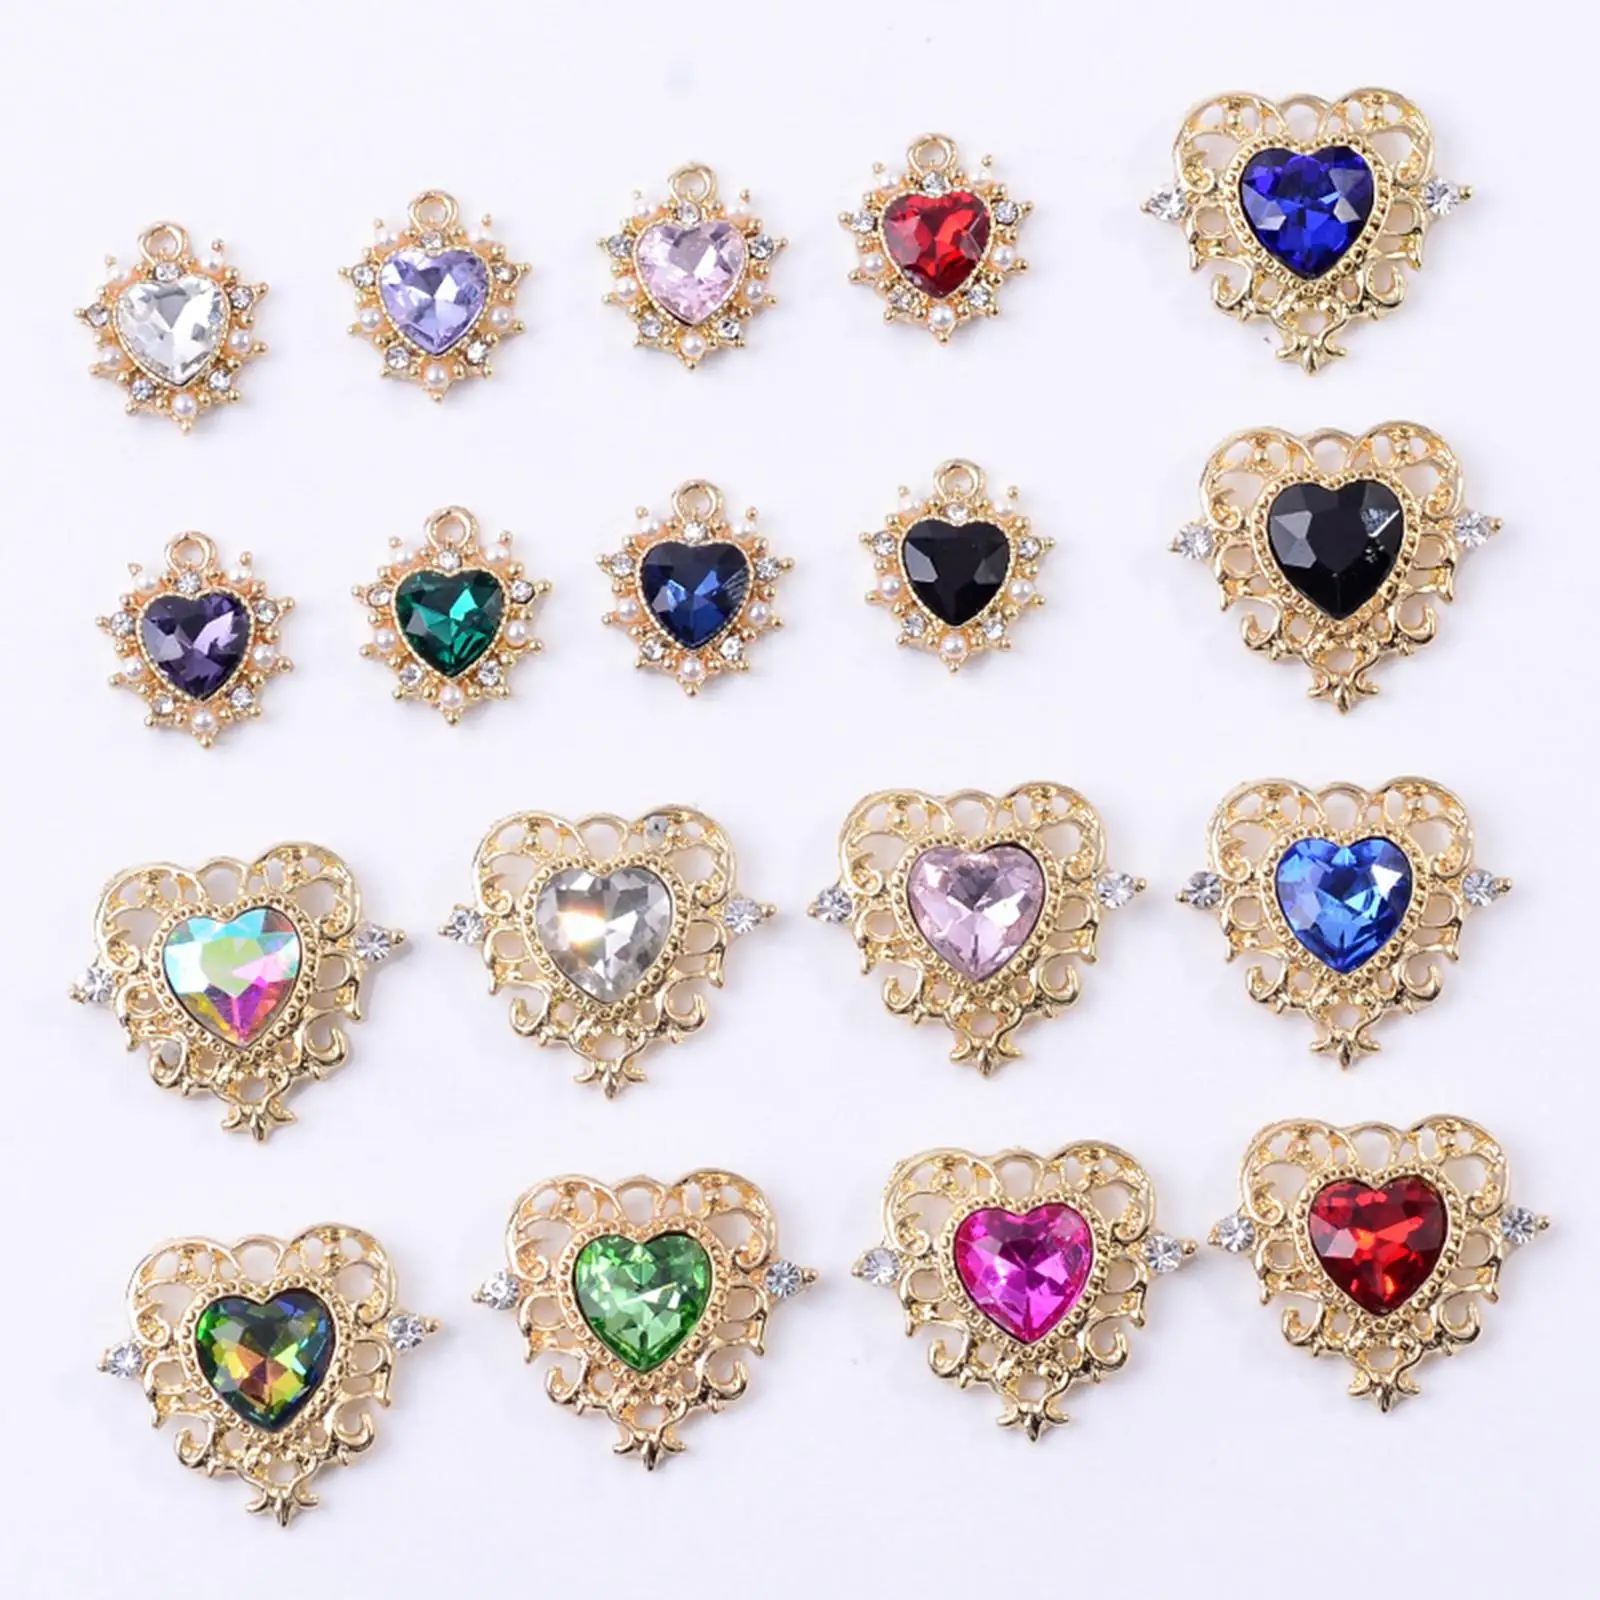 18Pcs Alloy Heart Pendants Mixed Craft Charms DIY for Bracelet Earring Necklace Jewelry Making Keychain Charms